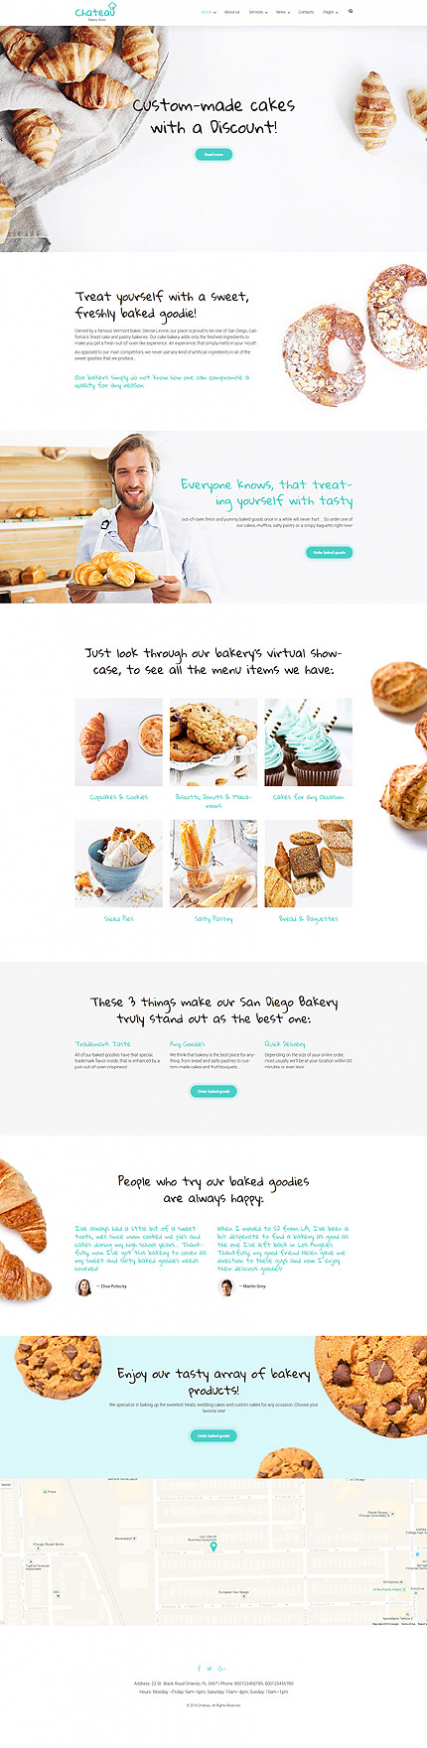 Chateau - Bakery and Receipts WordPress Theme